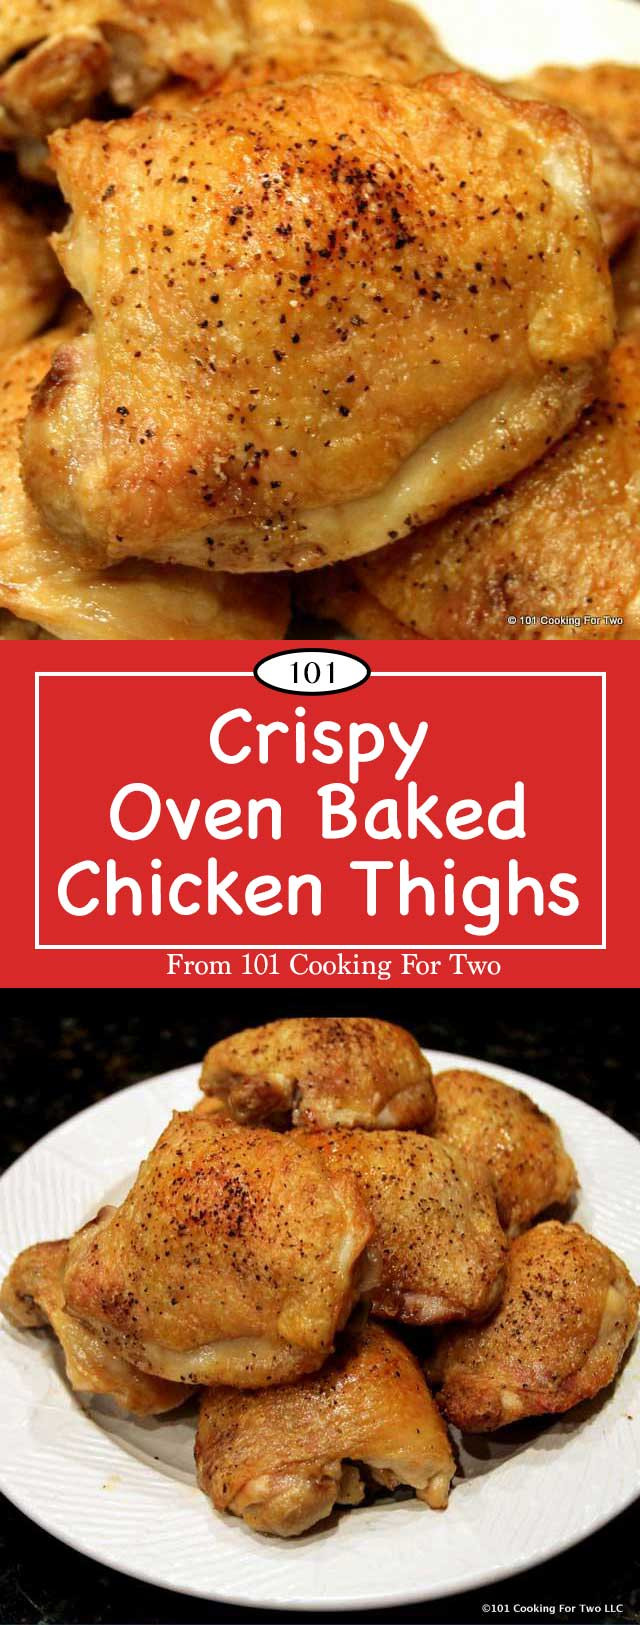 Calories In Baked Chicken Thigh
 Crispy Oven Baked Chicken Thighs